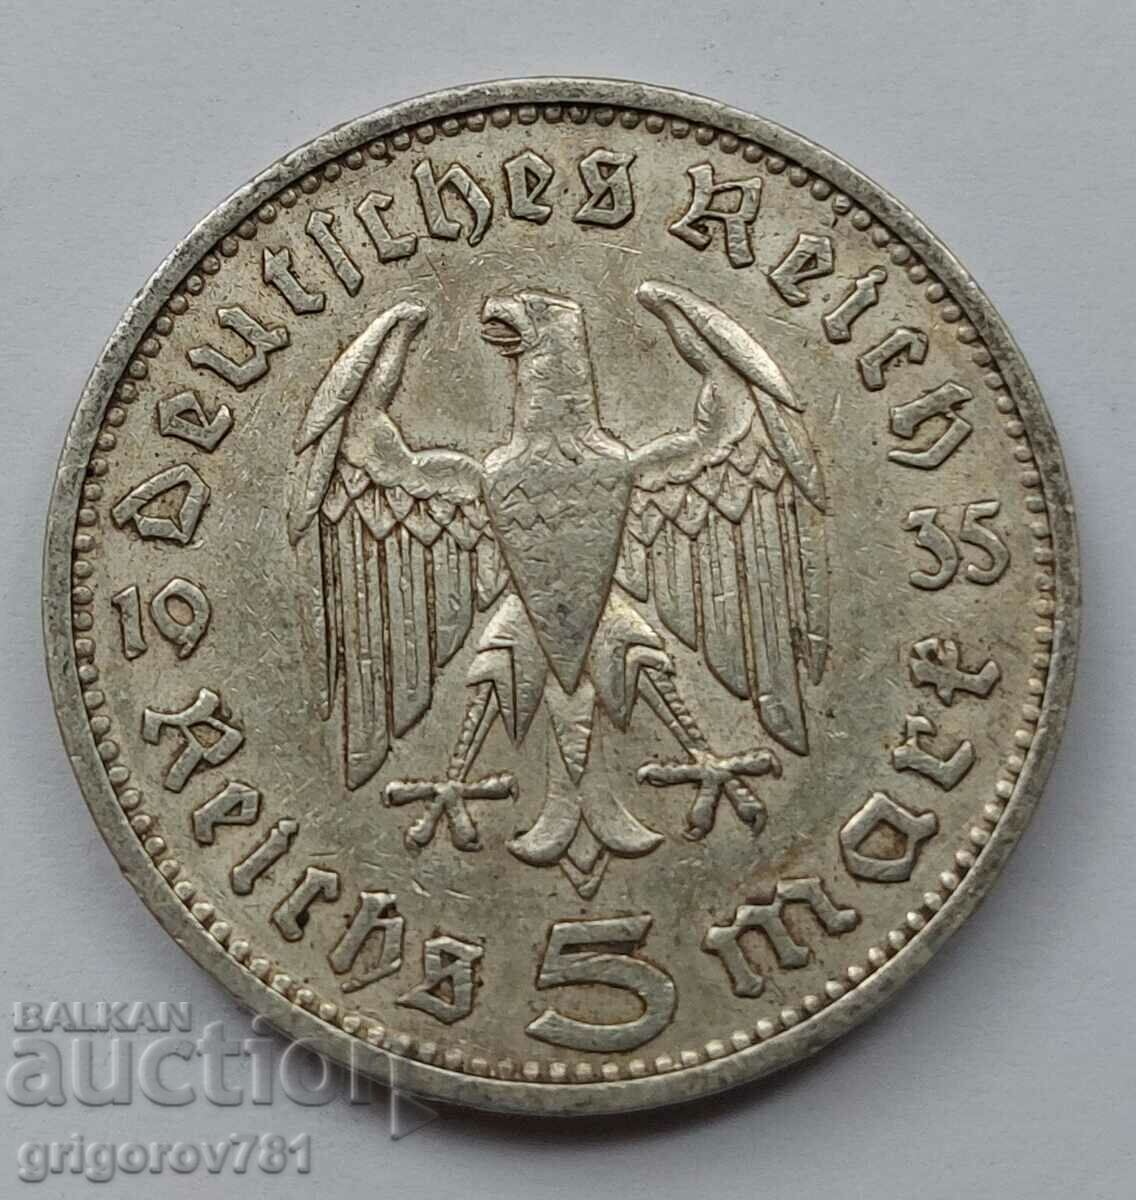 5 Mark Silver Germany 1935 F III Reich Silver Coin #71